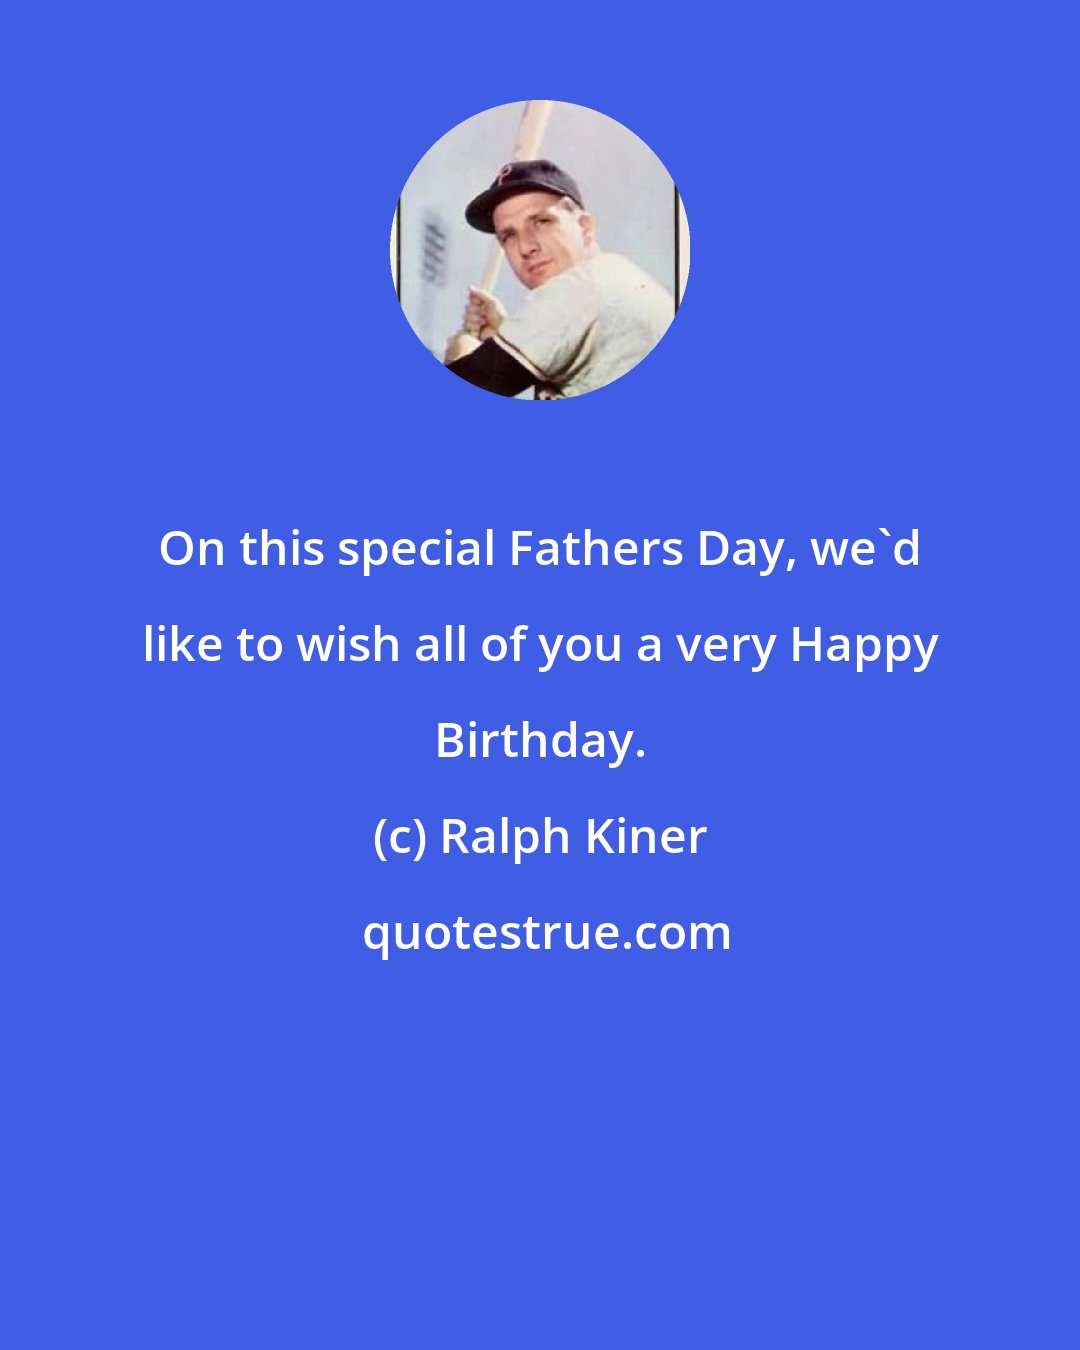 Ralph Kiner: On this special Fathers Day, we'd like to wish all of you a very Happy Birthday.